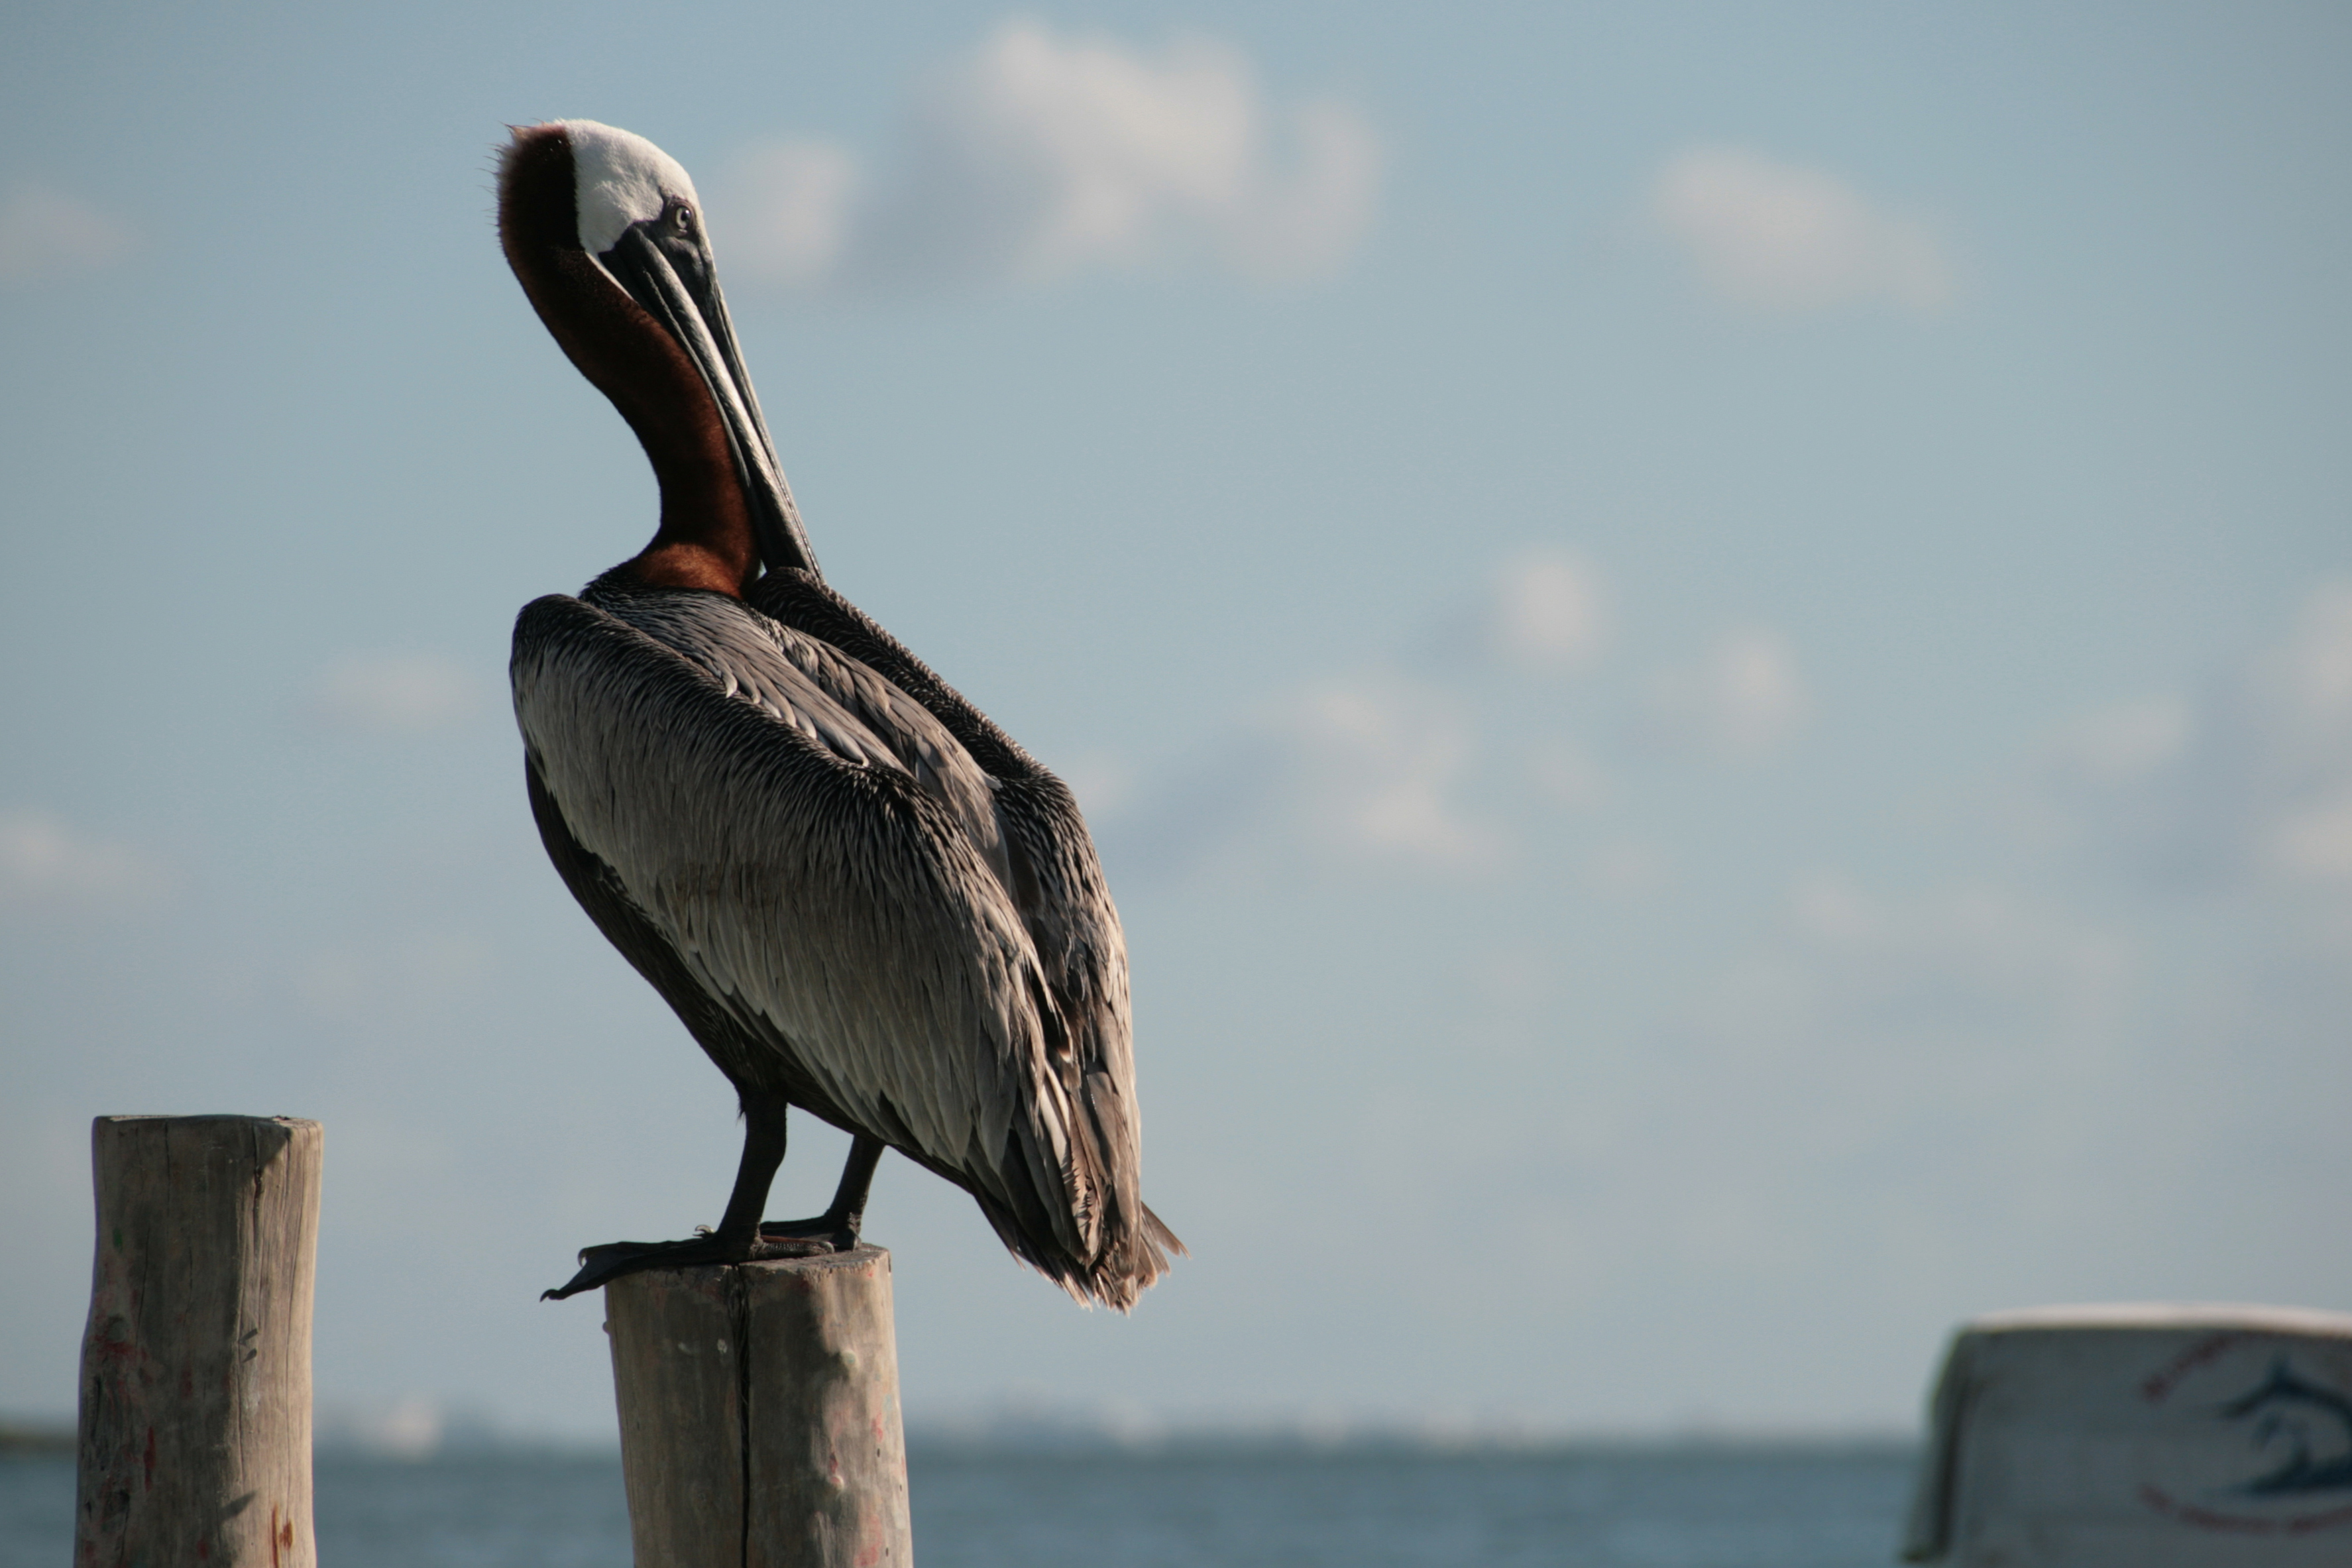 Pelicans are the most famous birds of the area. They can be seenspecially in fisher villages, wharfs and harbours.